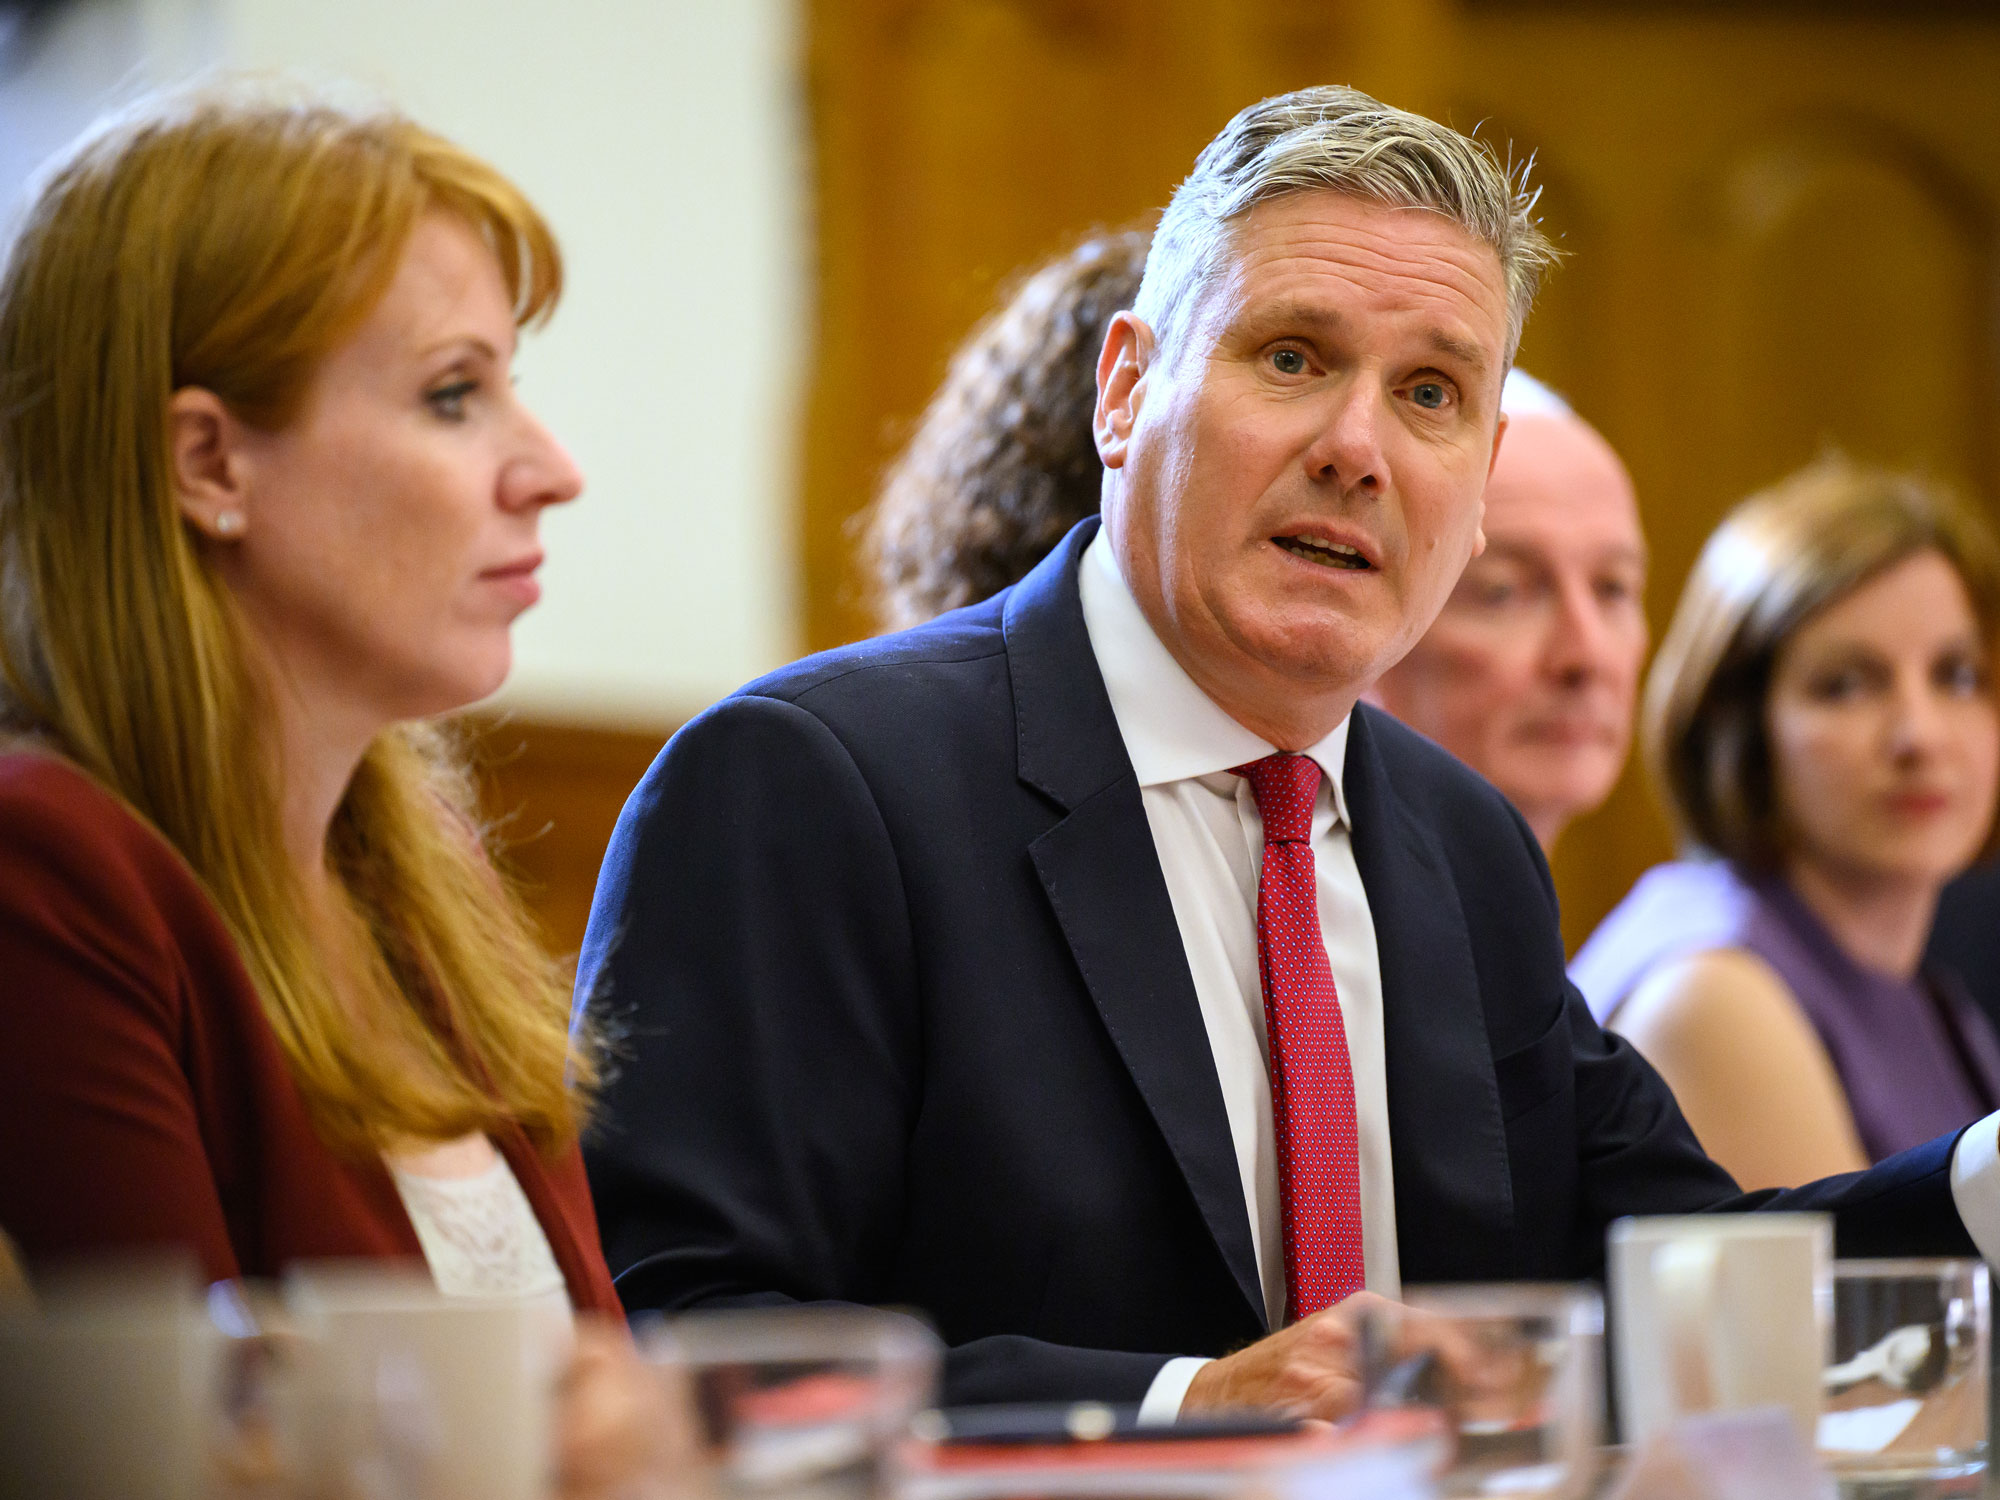 Keir Starmer Vows to End Use of Hotels for Asylum Seekers, Hire ...